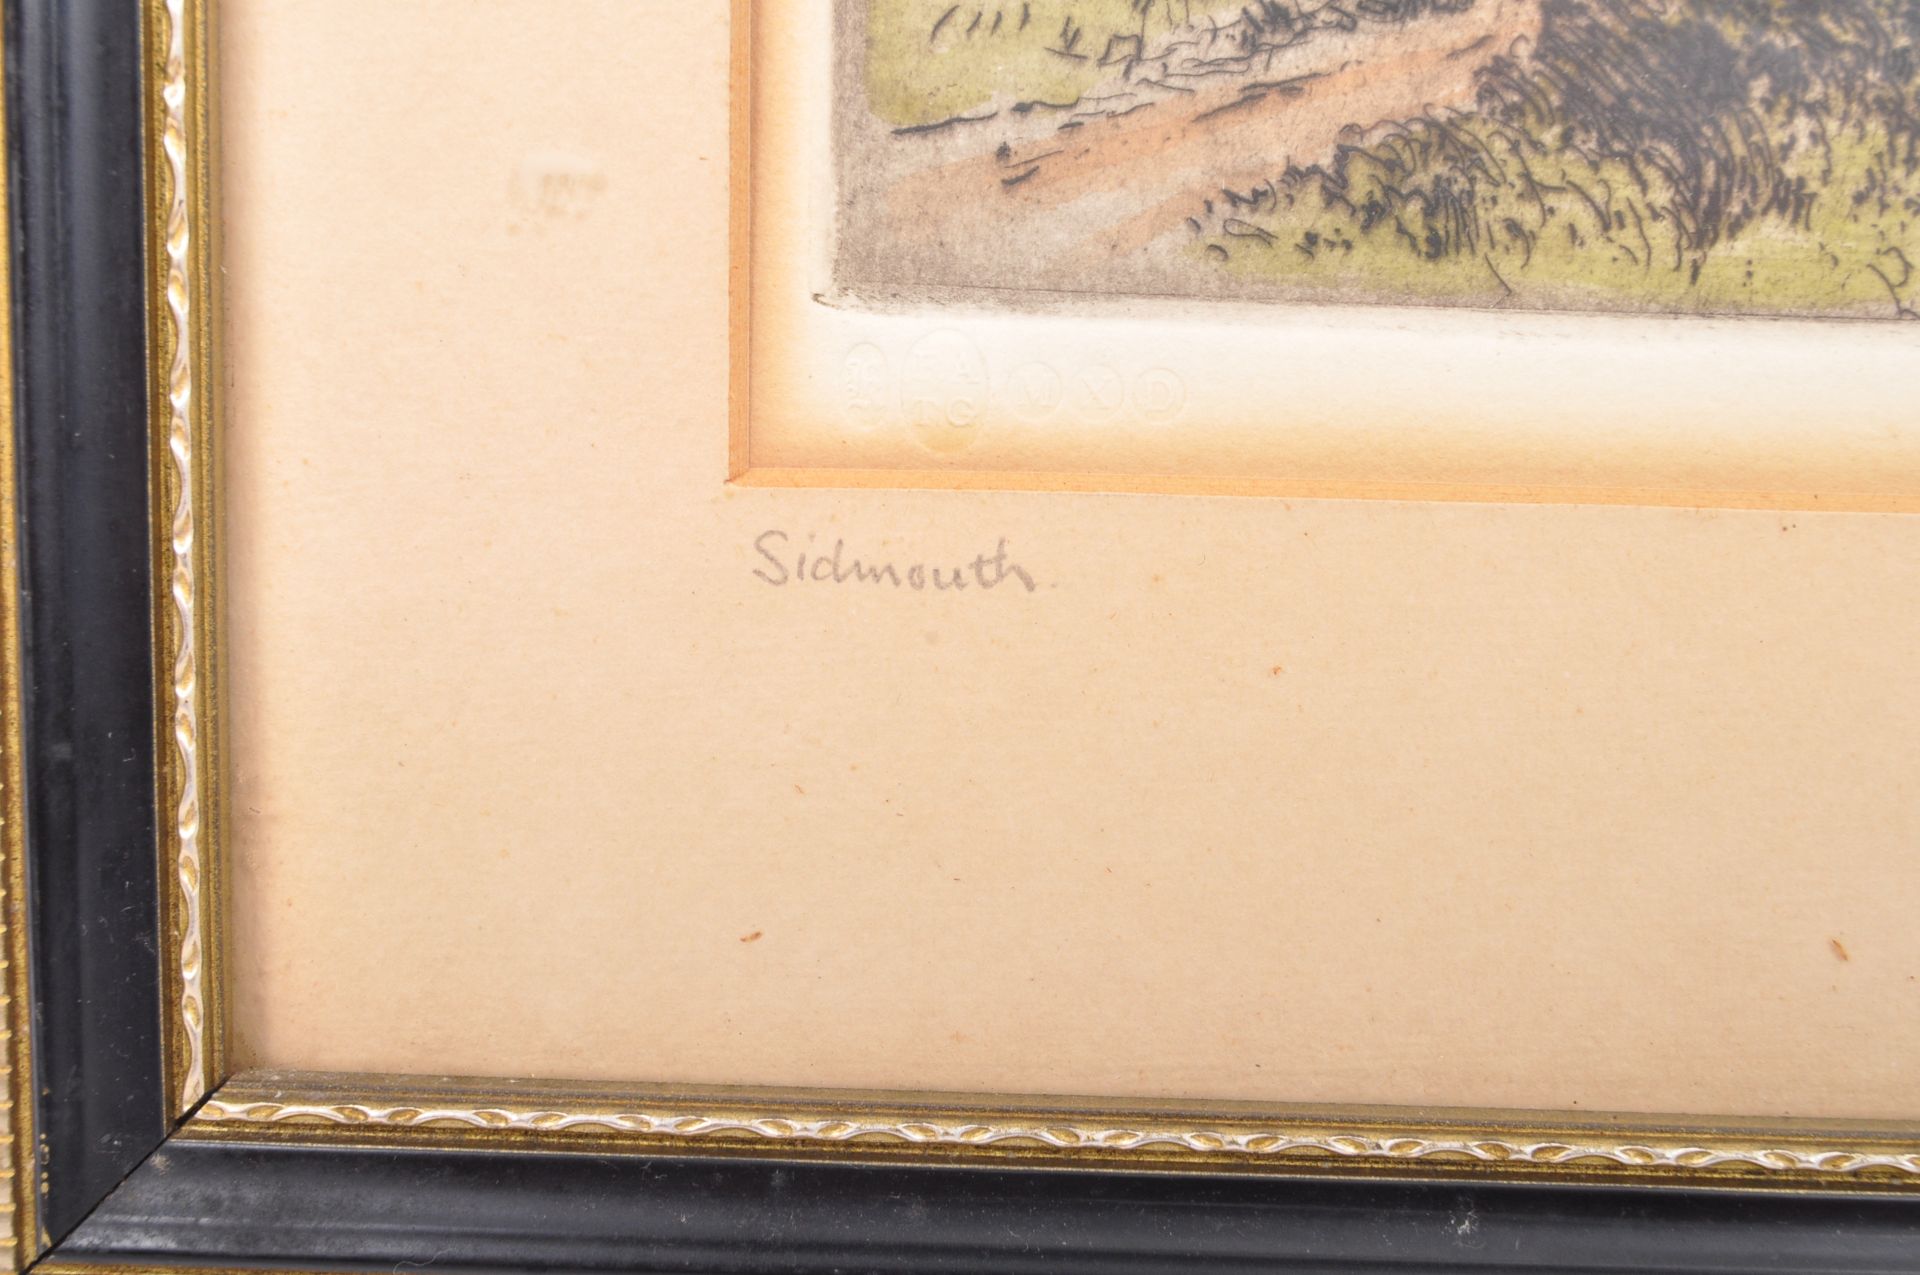 WALTER HENRY SWEET - SIDMOUTH - WATER COLOUR - Image 3 of 6